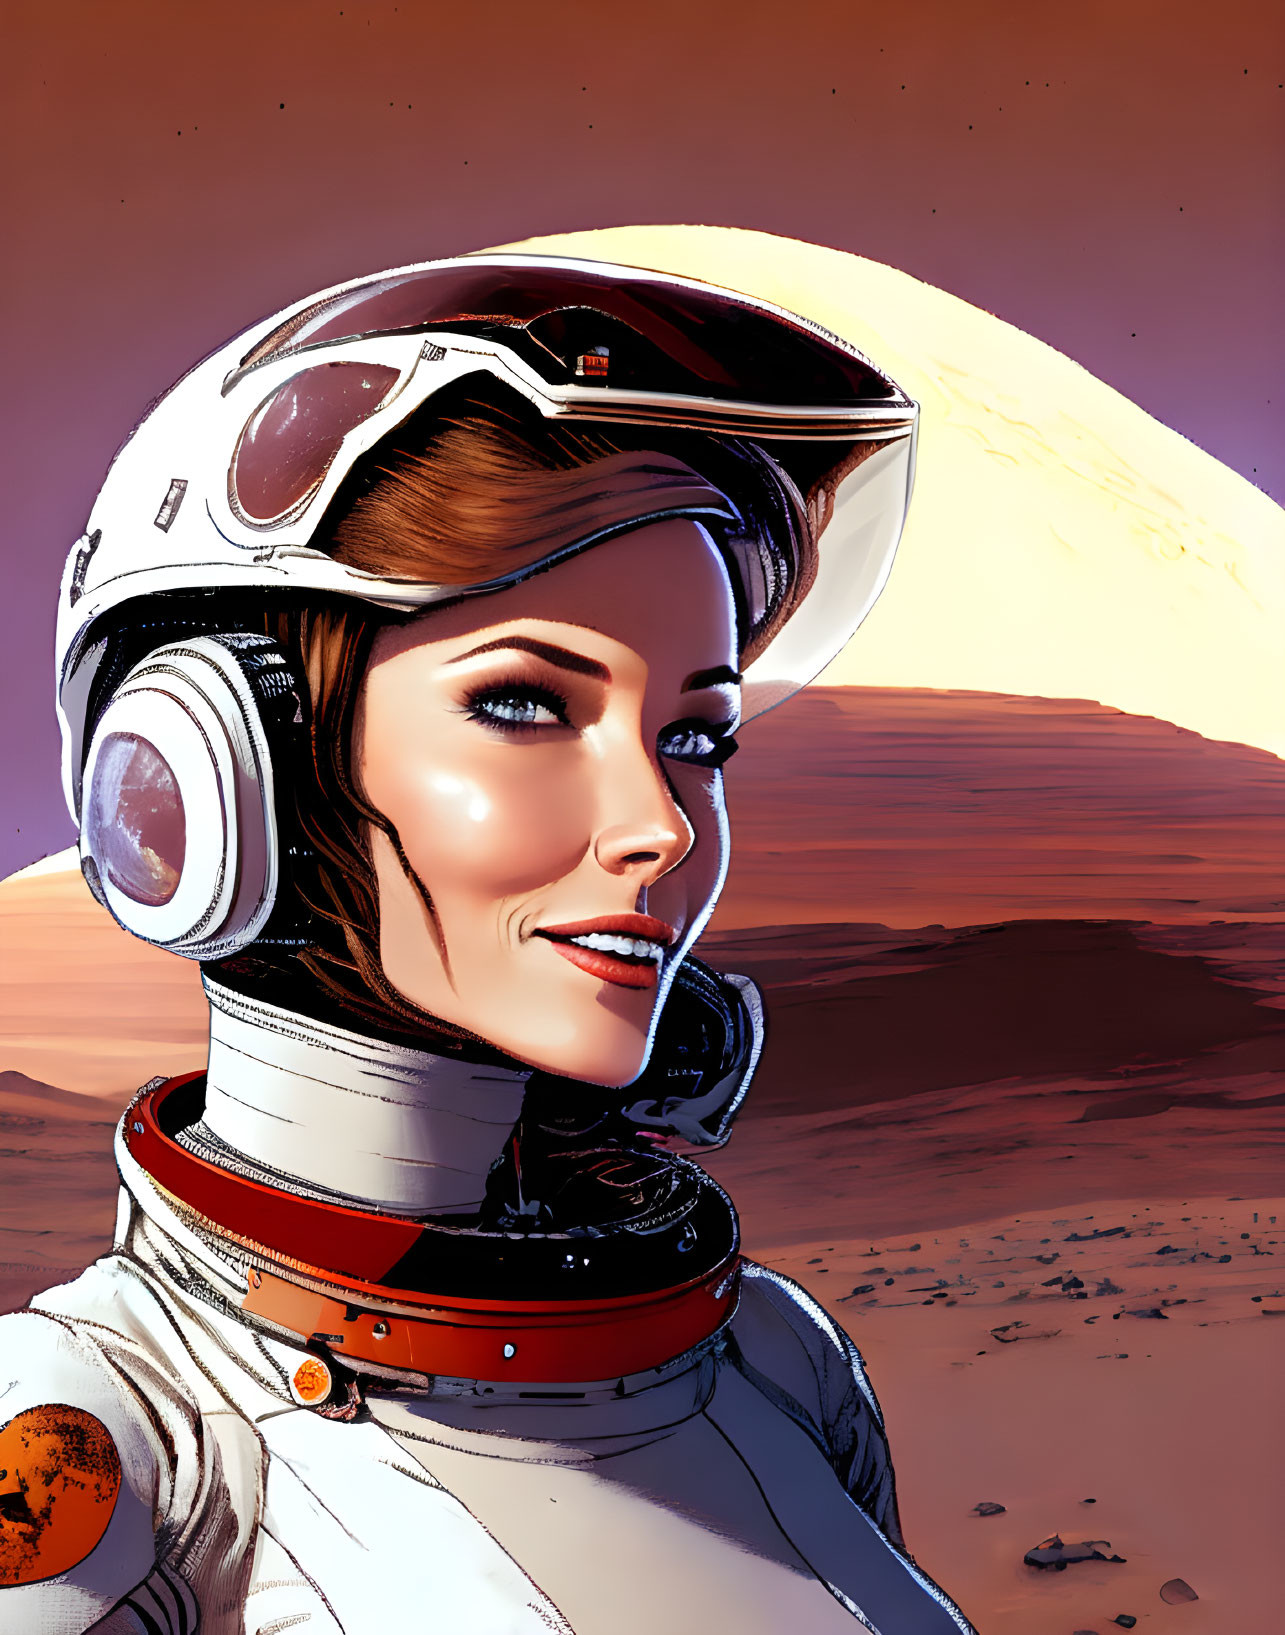 She Takes The First Breath of Fresh Air On Mars